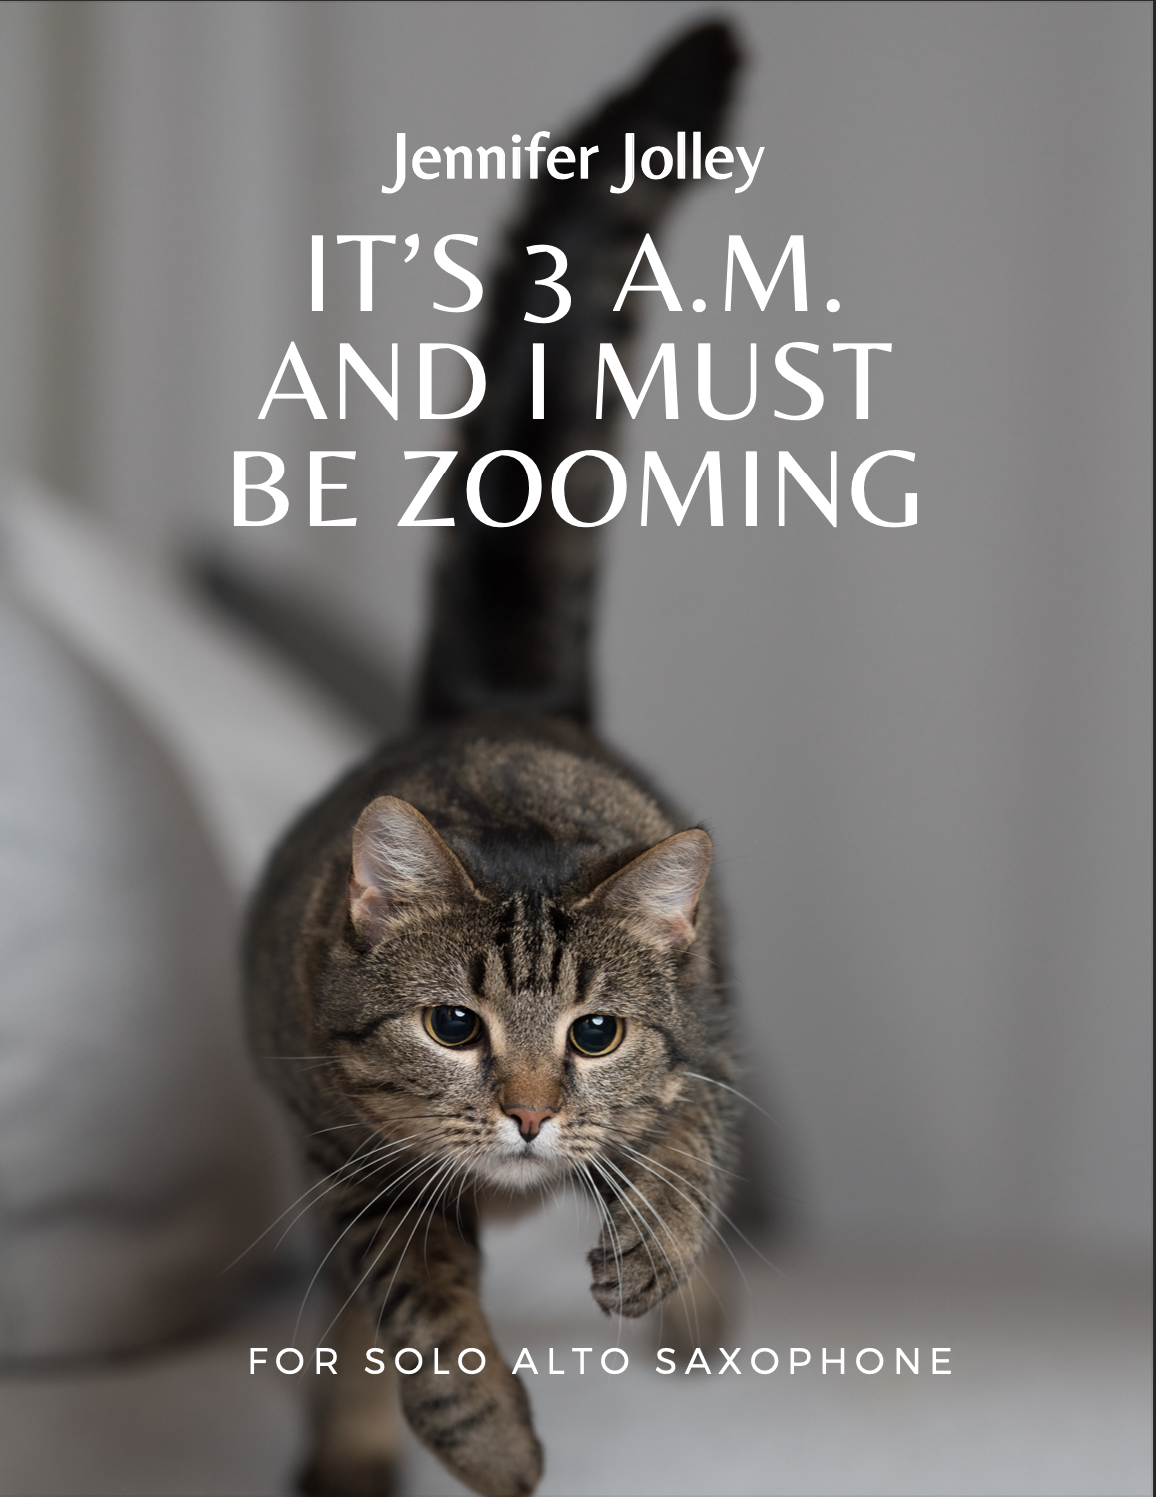 It's 3 A.M. And I Must Be Zooming by Jennifer Jolley